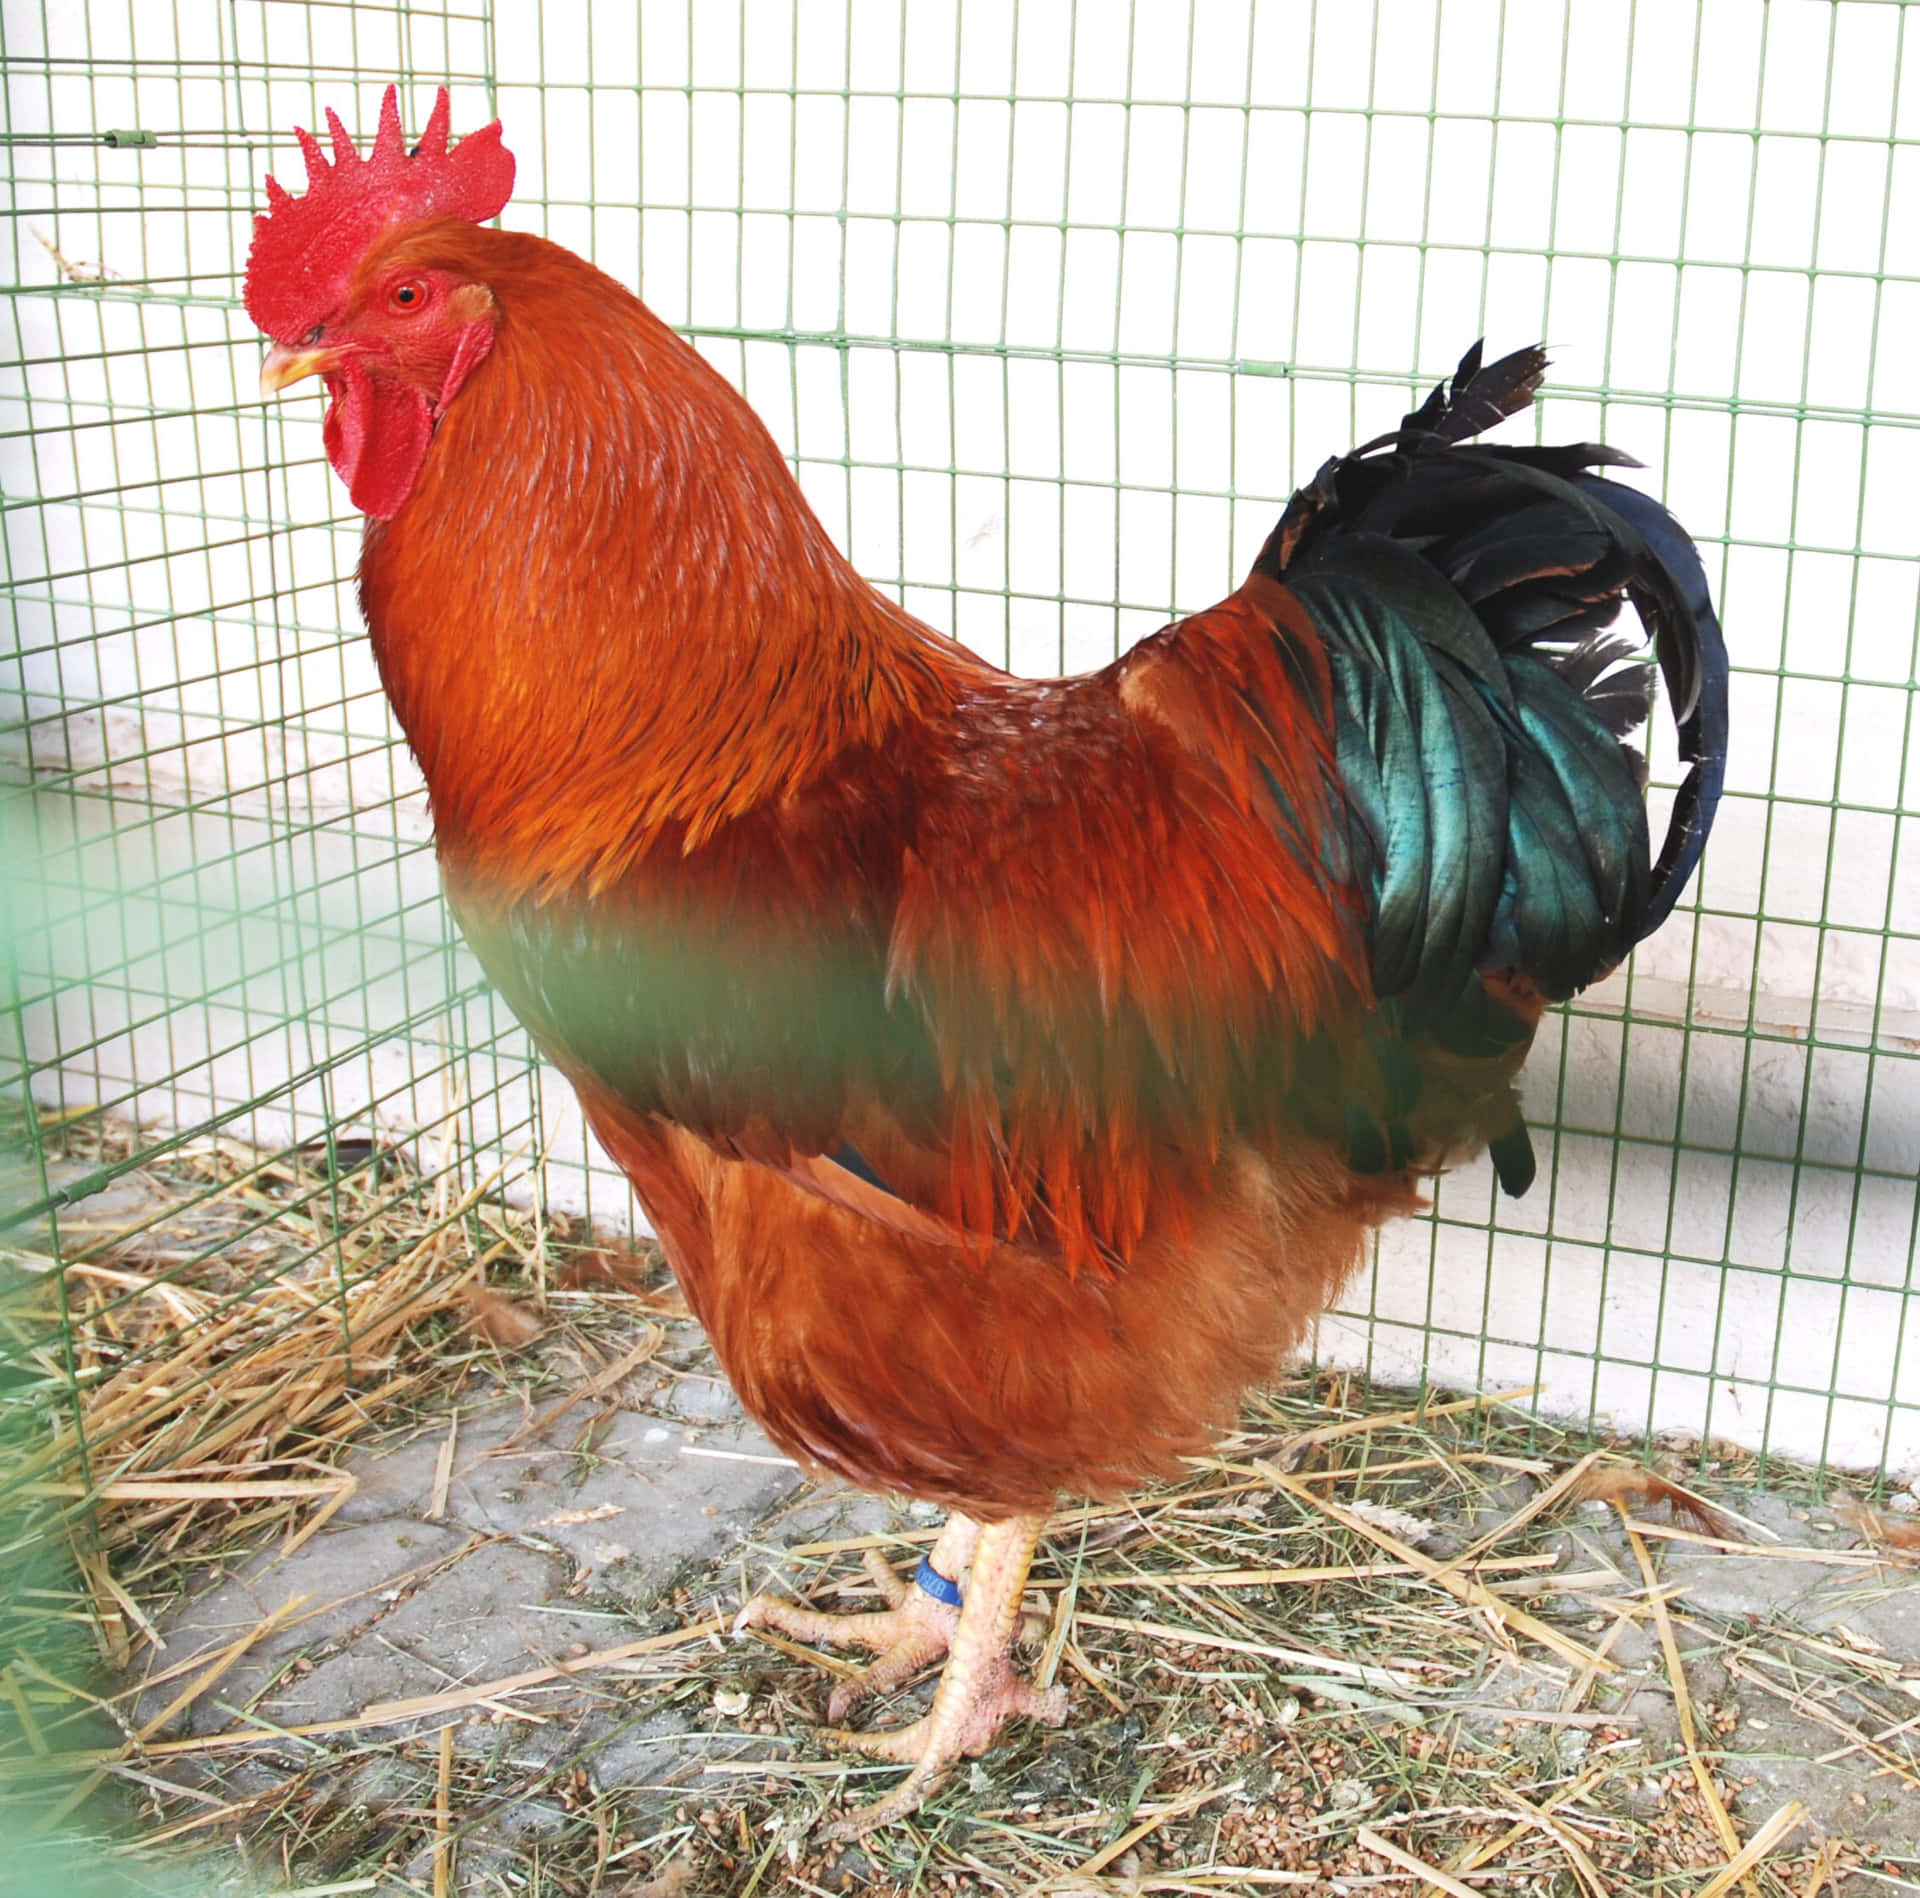 A Rooster Standing In A Cage